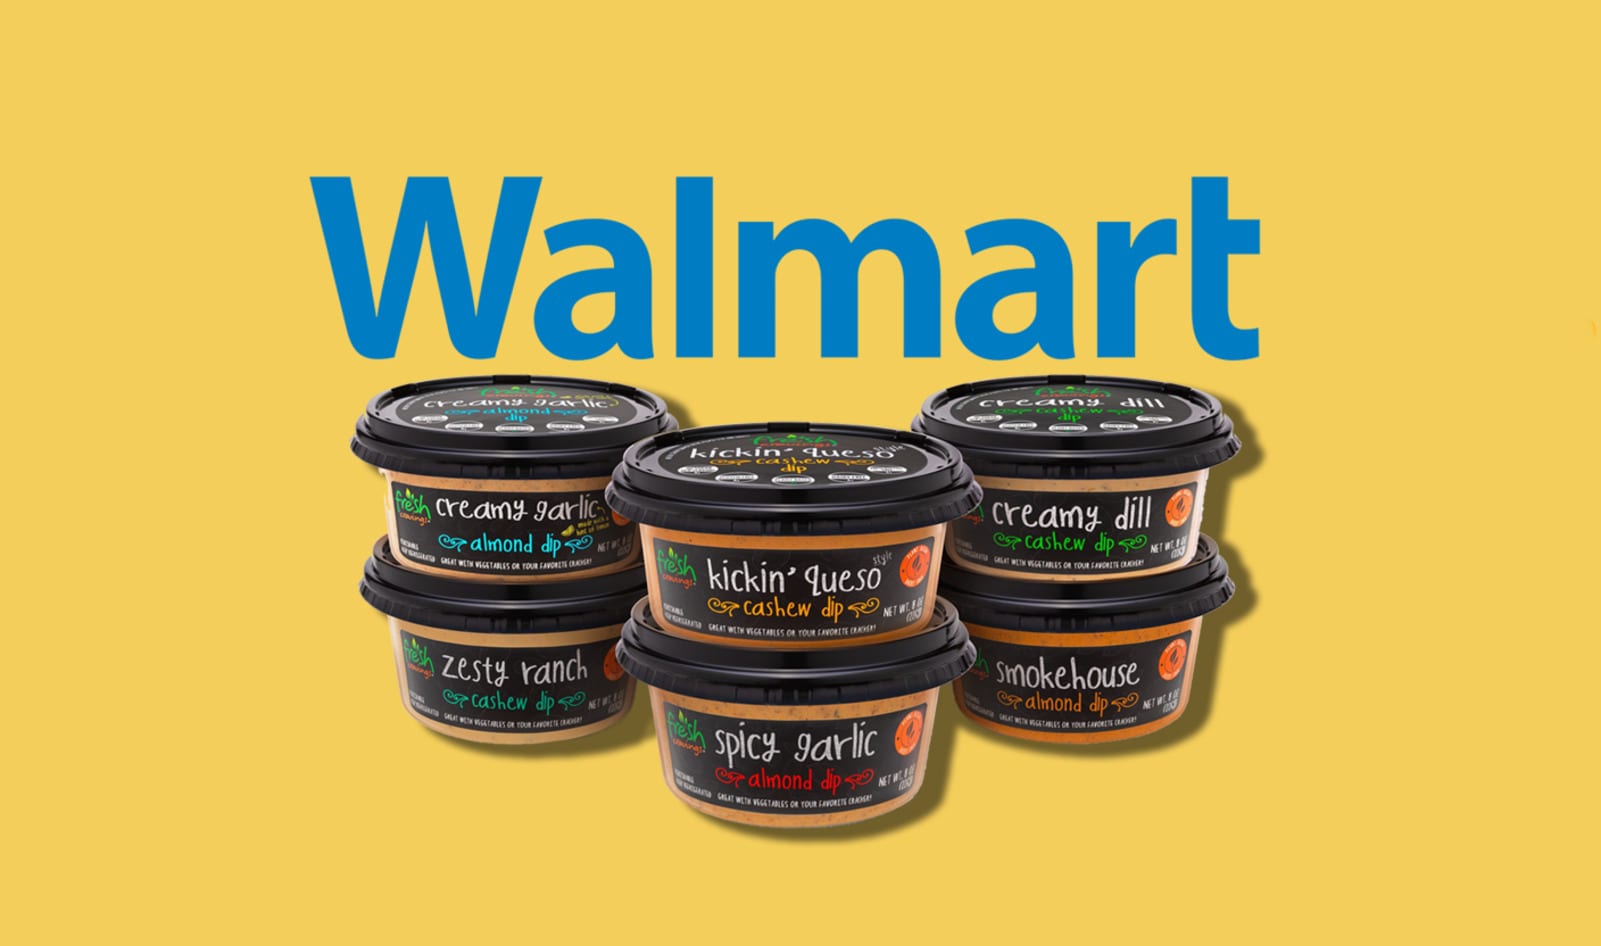 New Vegan Queso and Ranch Launch at Walmart